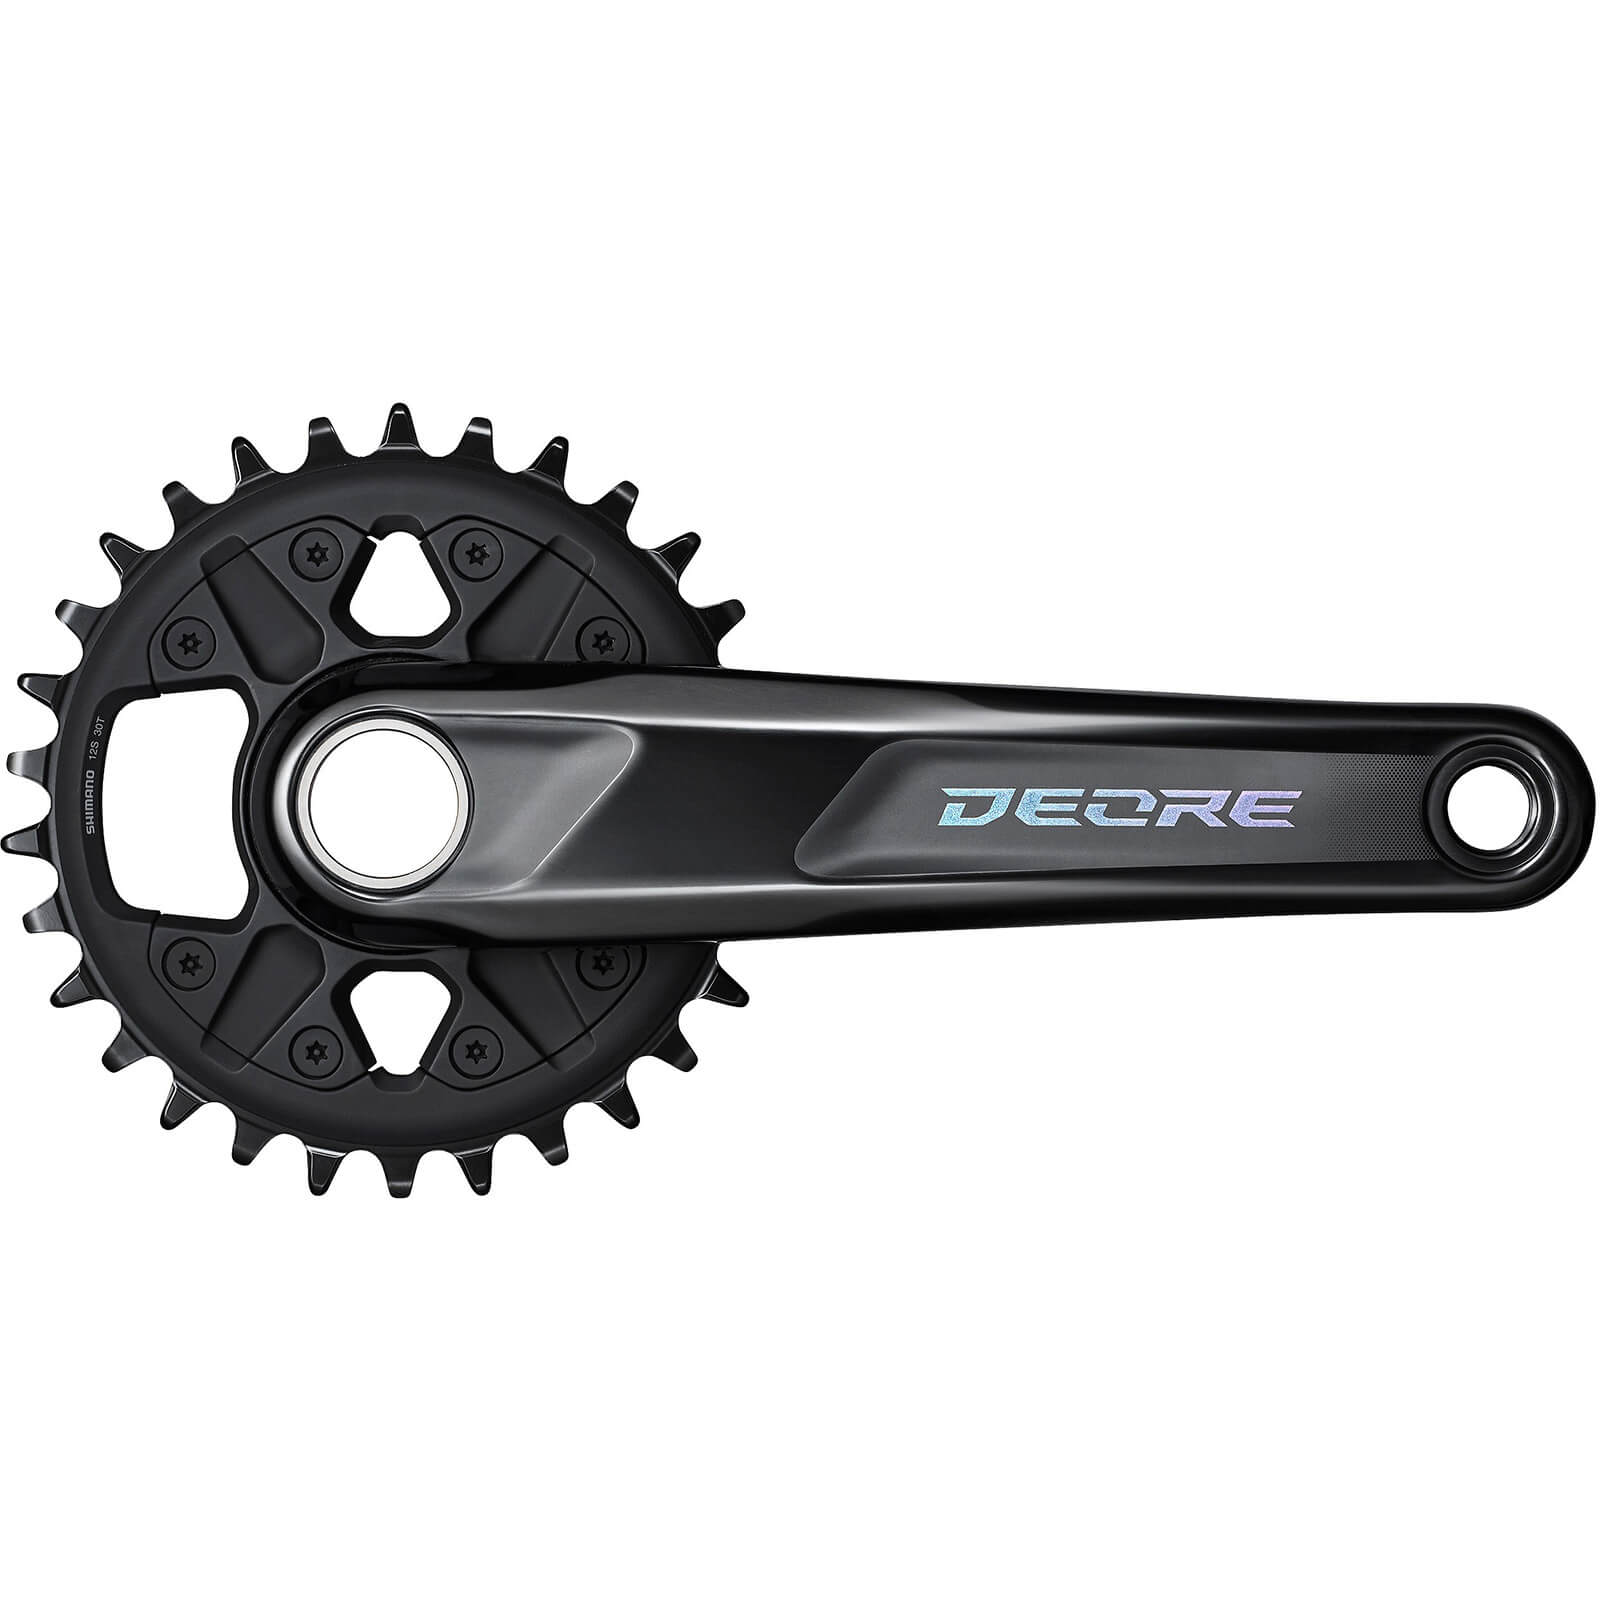 Shimano Deore M6100 Chainset - 30T - 175mm